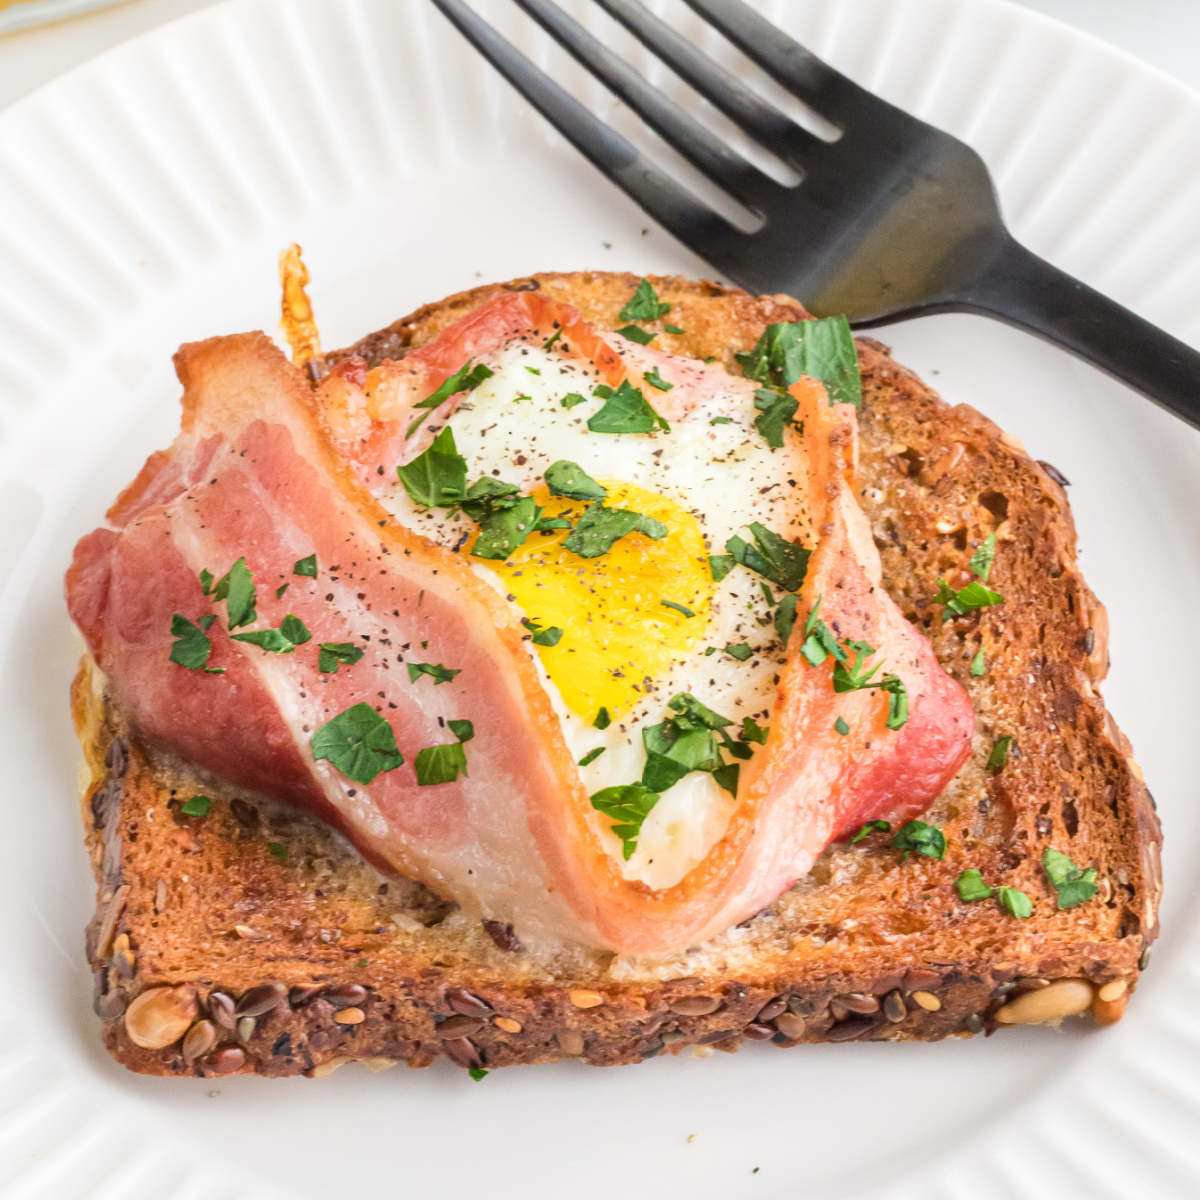 Fully cooked air fryer toast with bacon and egg served on a round white plate with a fork.